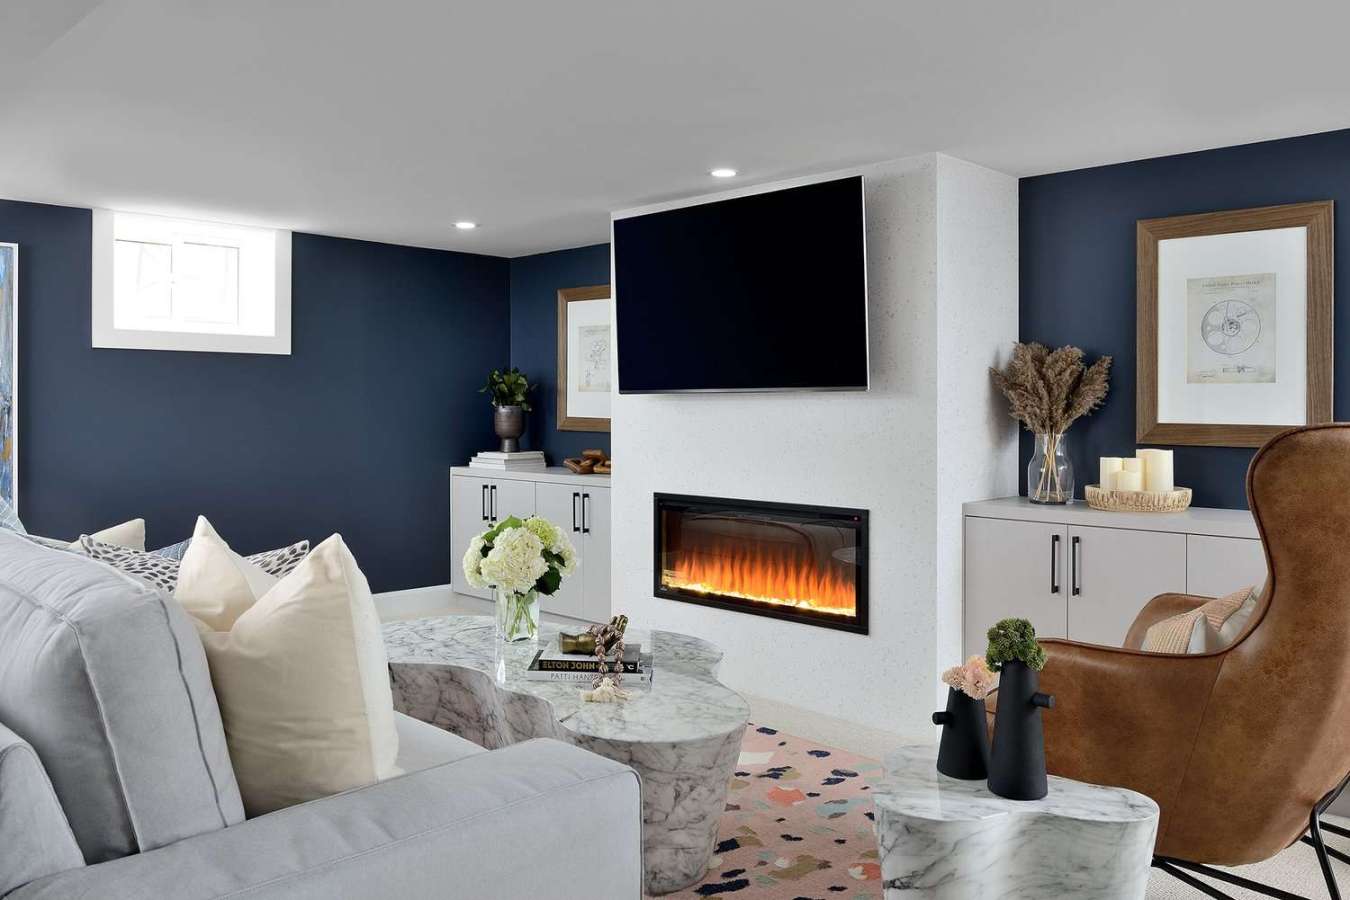 Electric Fireplace Ideas to Make Any Room Cozier